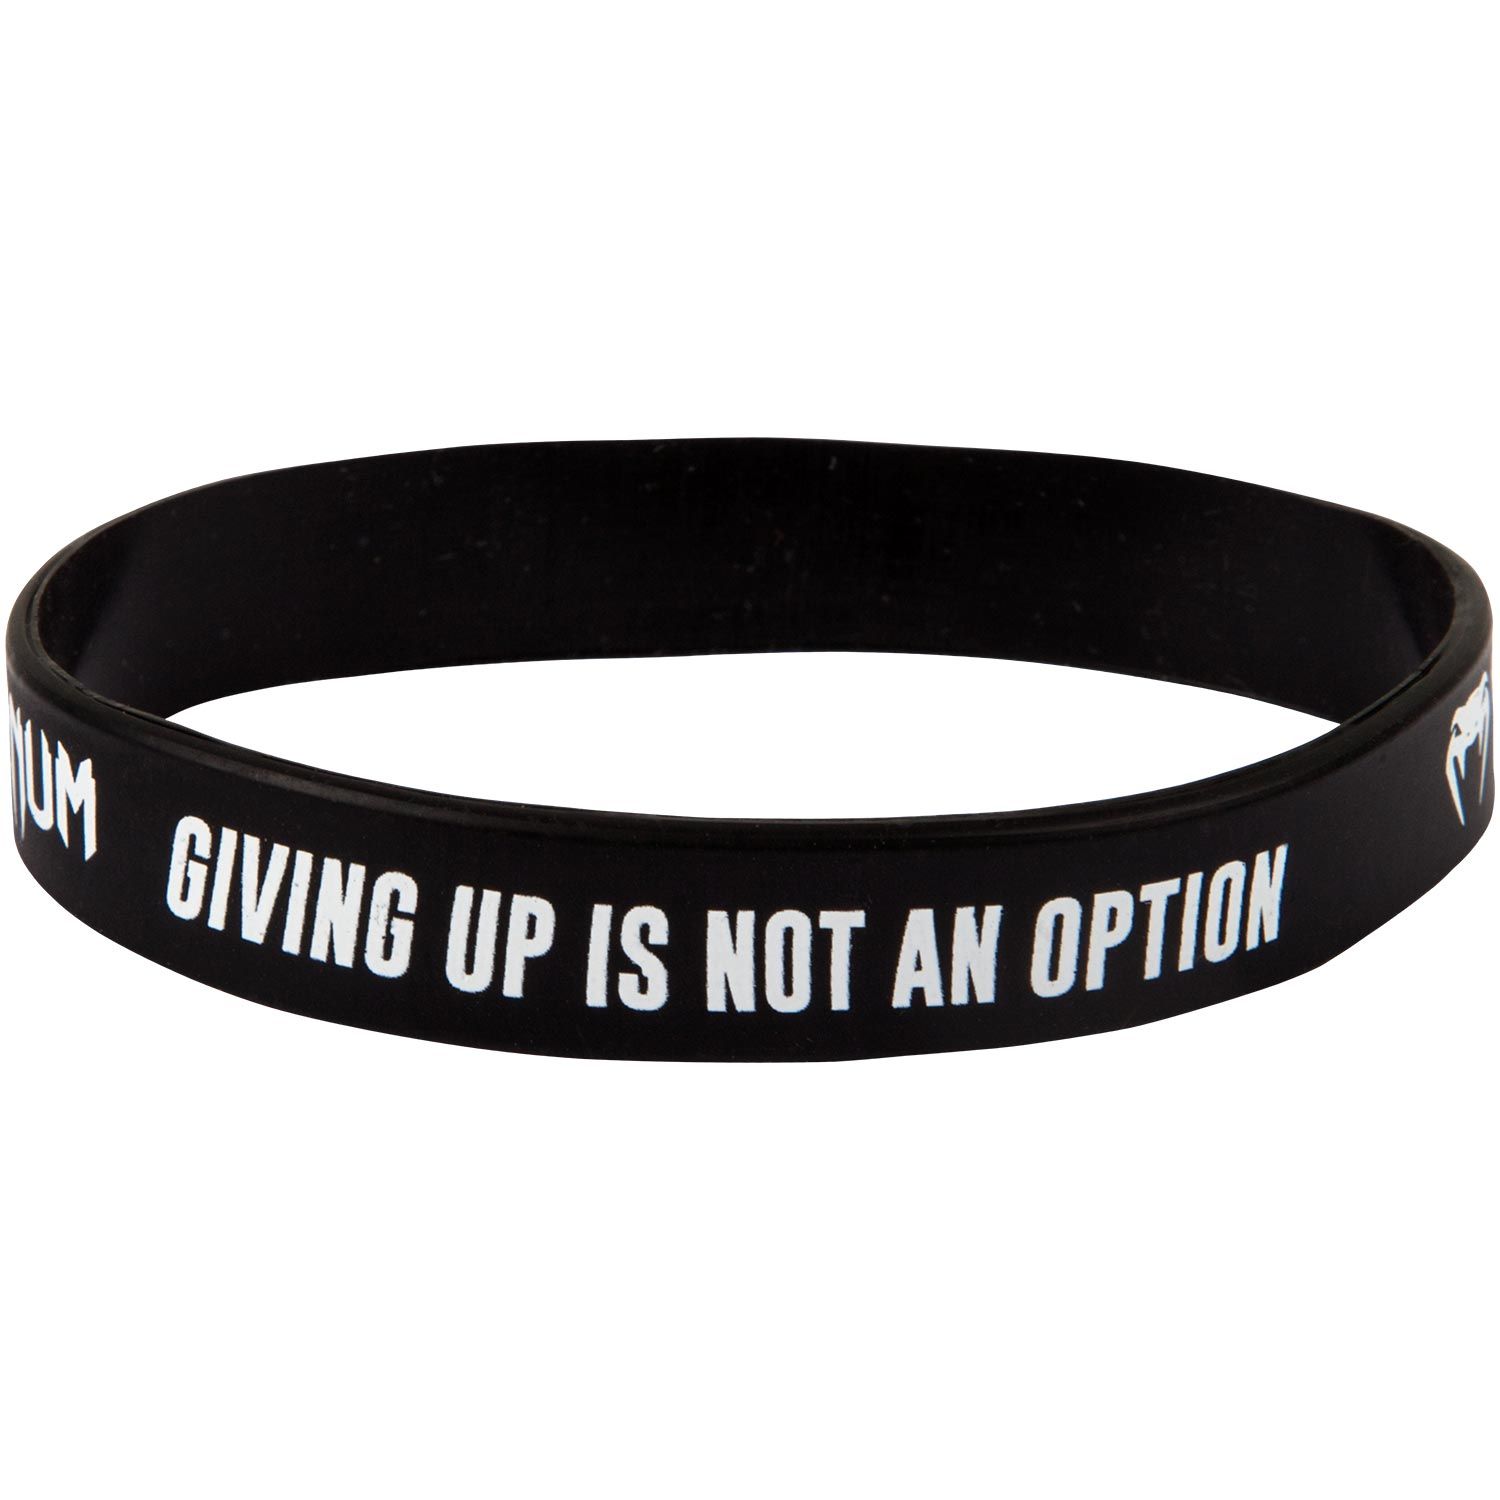 Venum Rubber Band - Giving up - Black